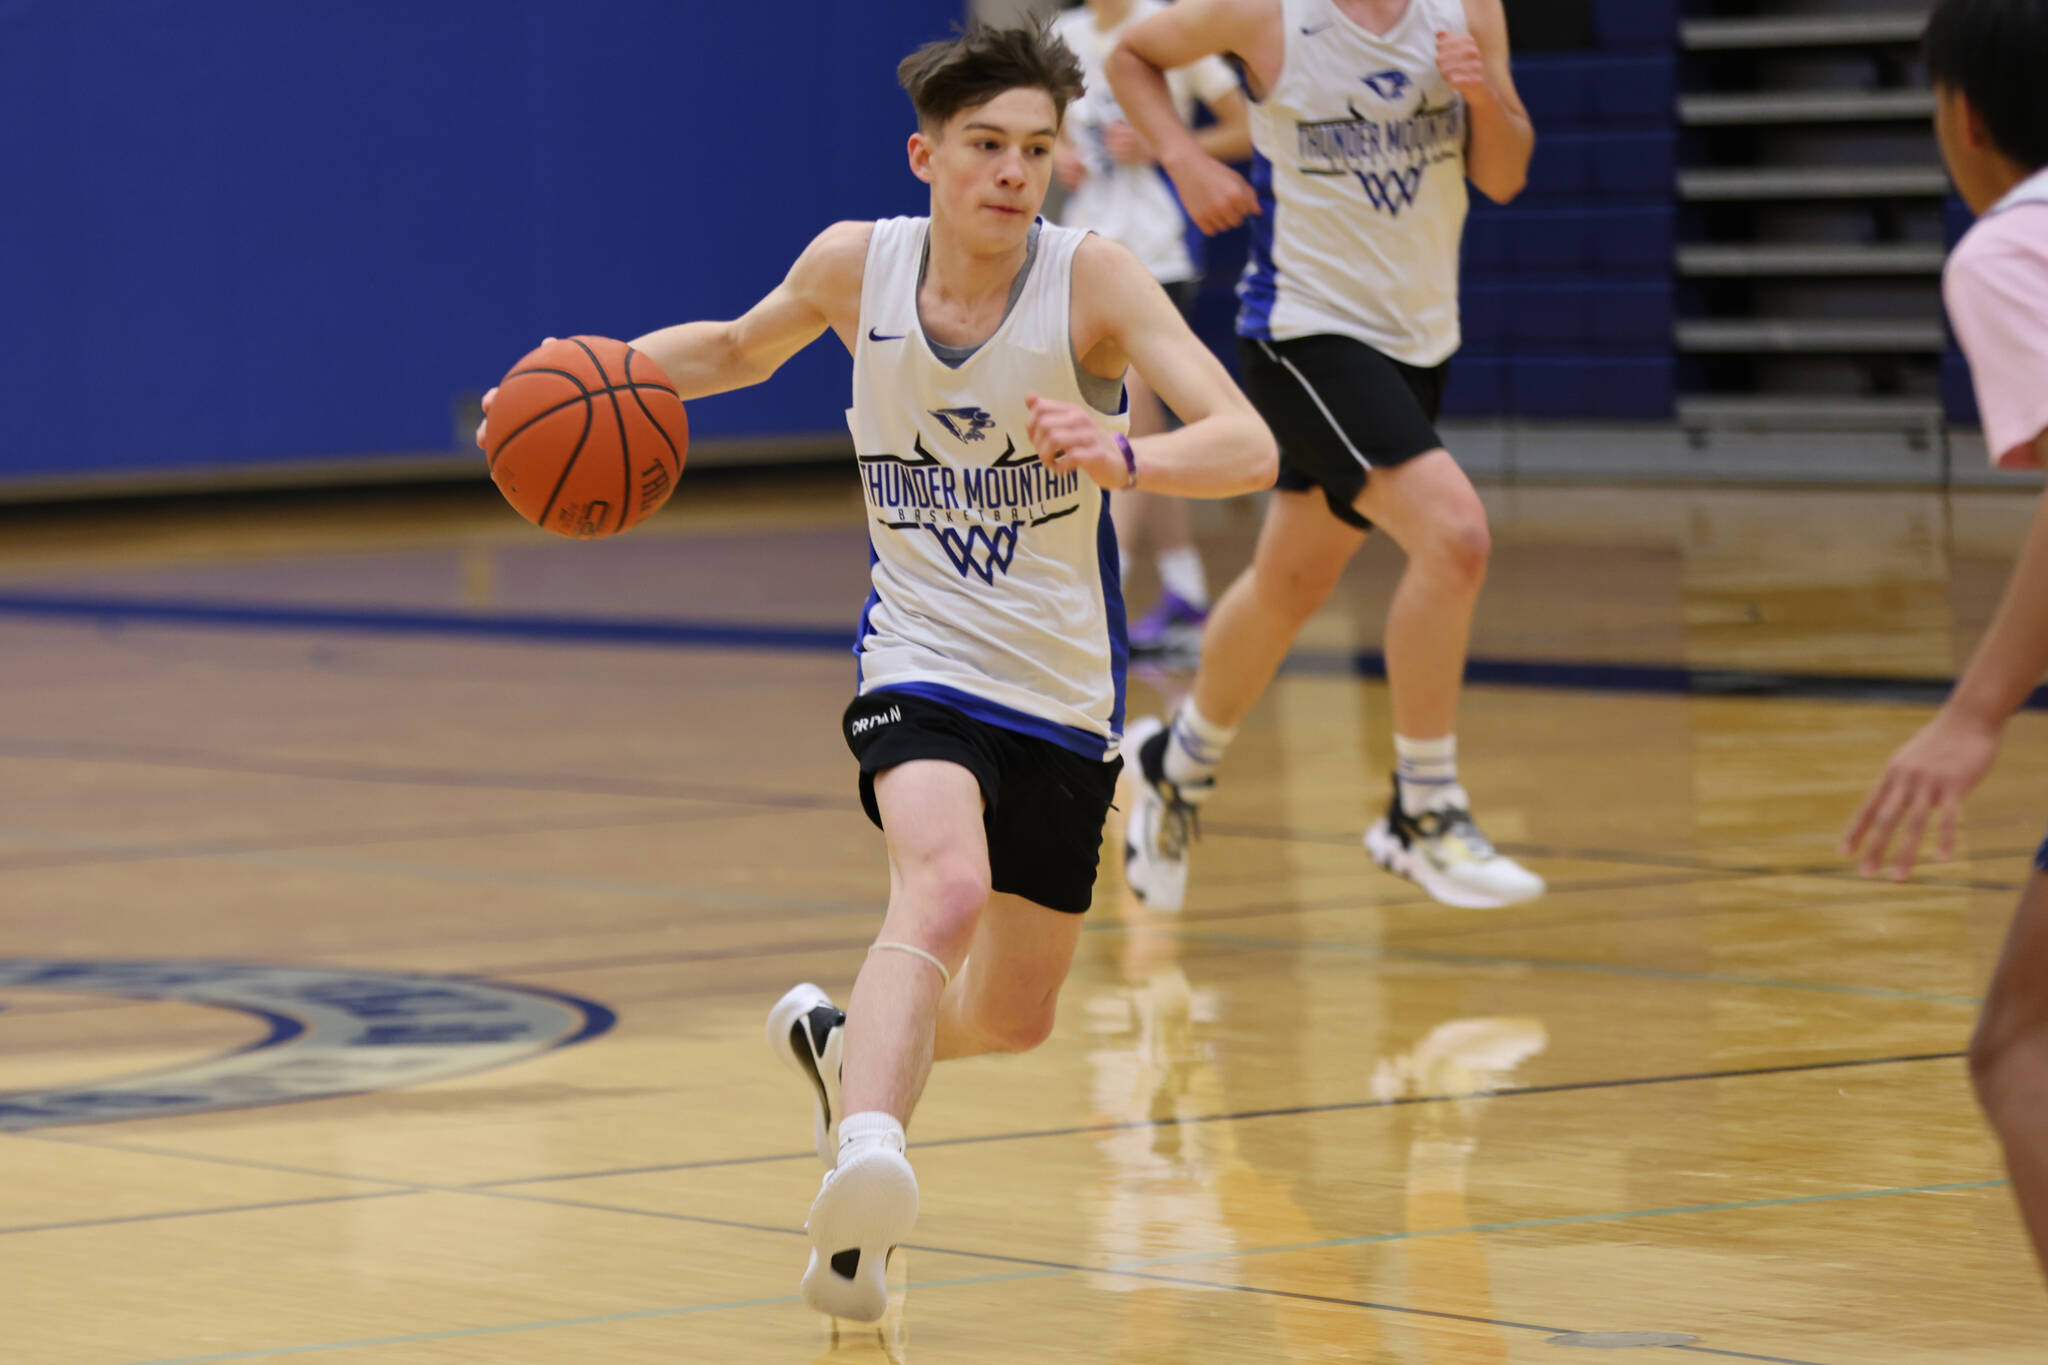 Samuel Lockhart  dribbles down the court while looking for a teammate cutting toward the hoop during a drill at Thunder Mountain High School. The 2022-23 iteration of the  TMHS boys basketball returns last year's leading scorers.